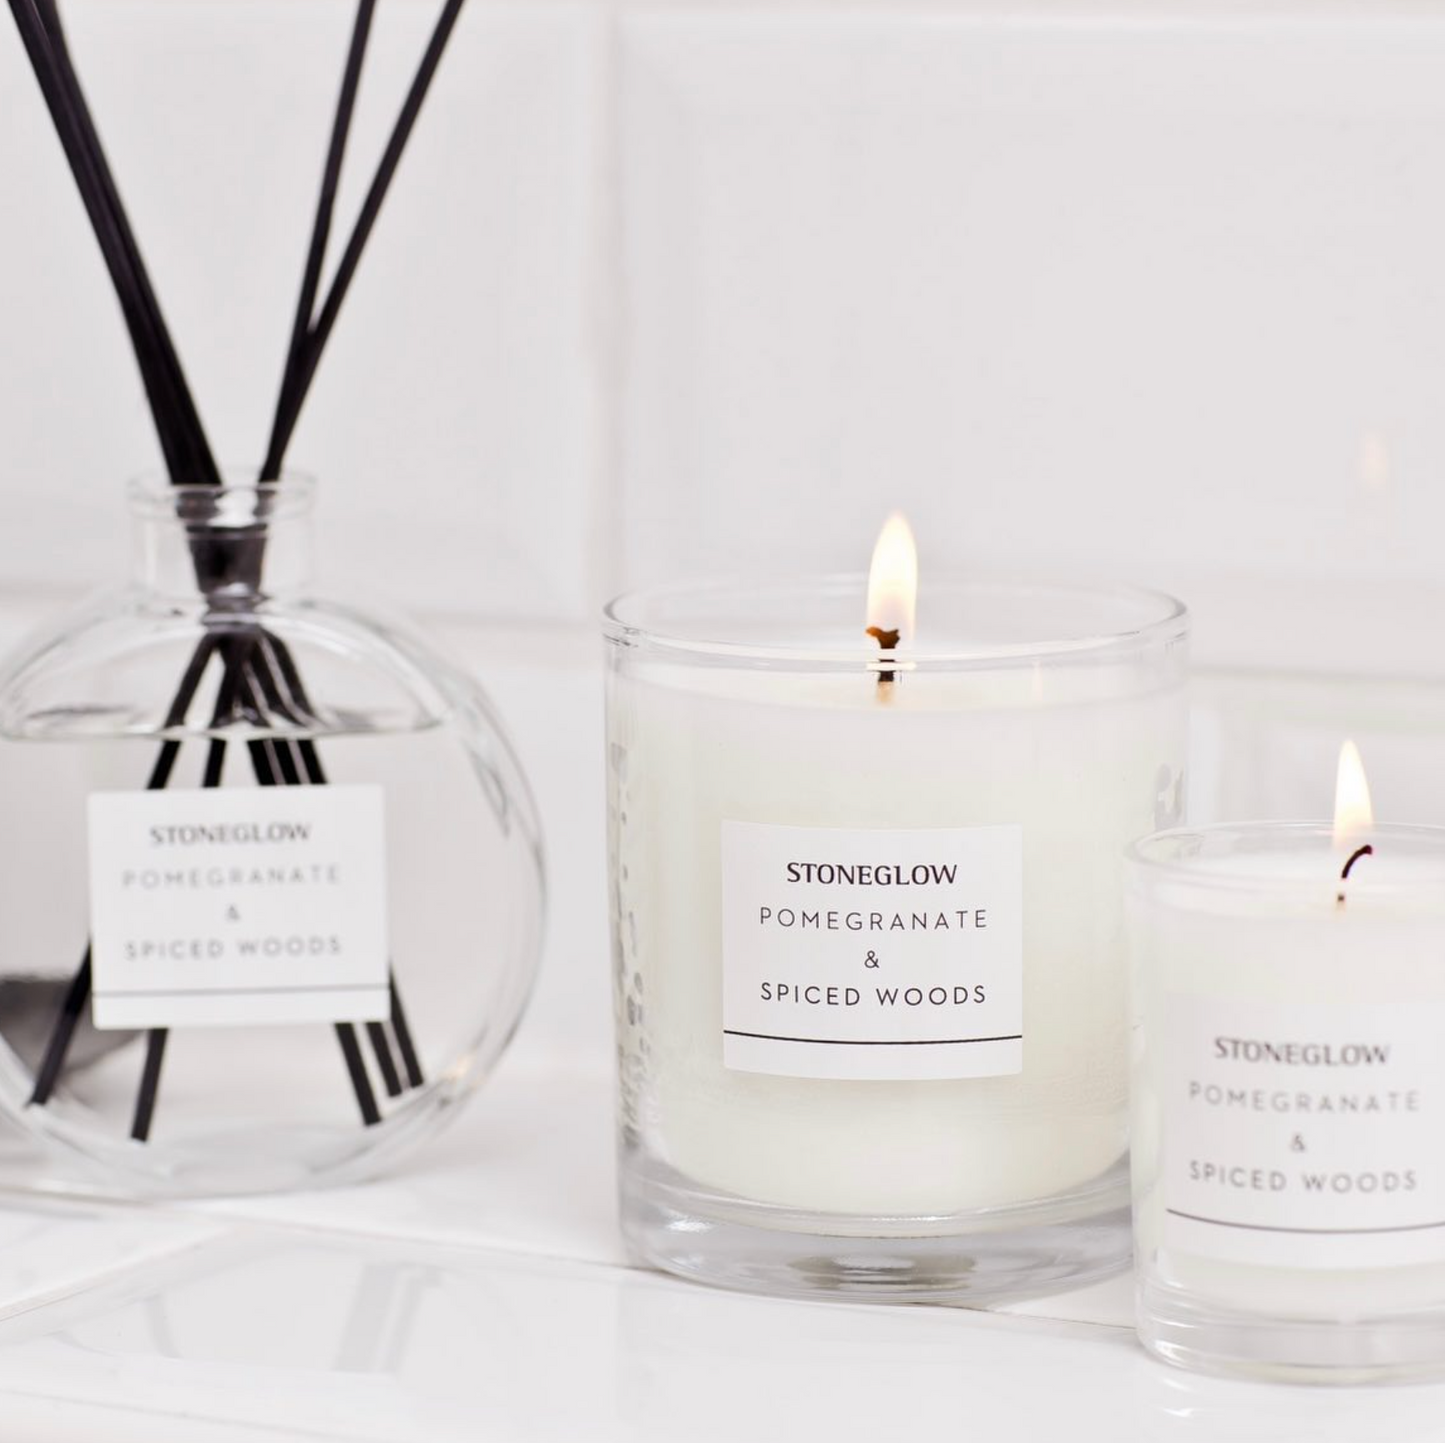 Stoneglow Modern Classics Collection Scented Candle, Pomegranate & Spiced Woods